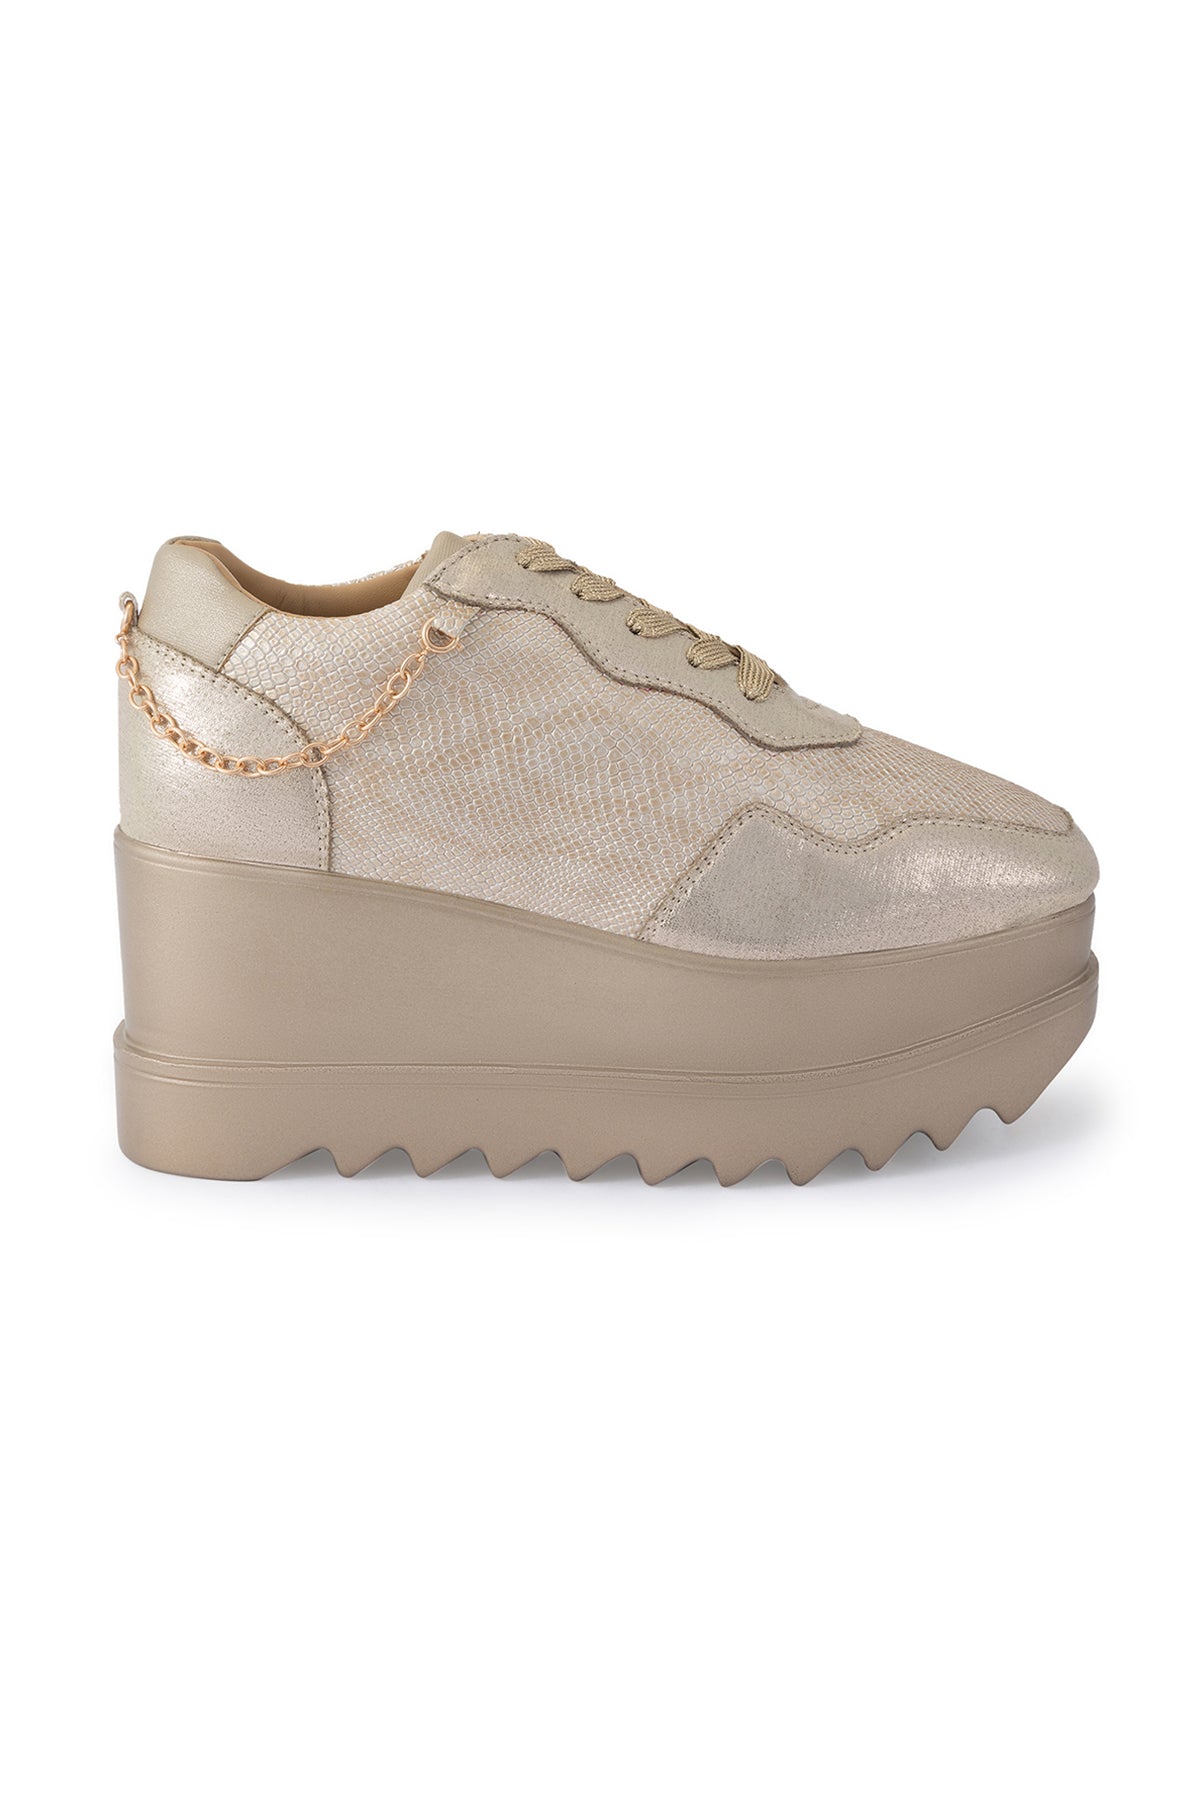 Groove Signature Wedge Sneakers with Gold Chain - Anaar